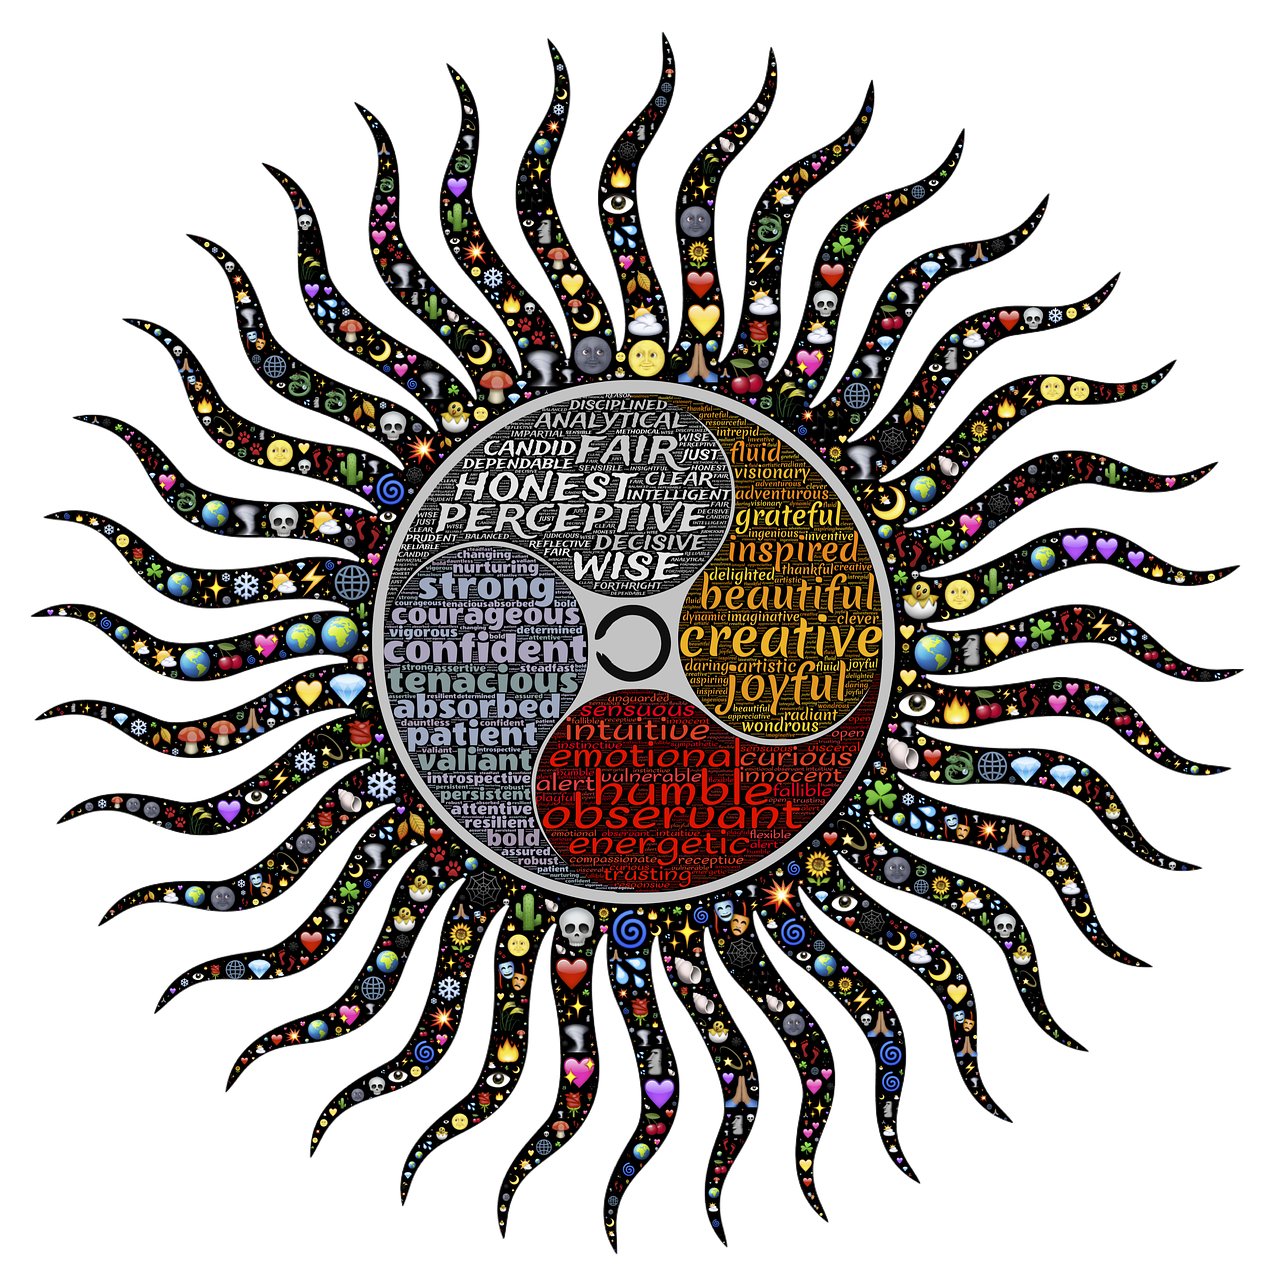 a picture of a sun with words all over it, an illustration of, by David G. Sorensen, sots art, yin yang, made of multicolored crystals, on black background, artwork roman mosaic